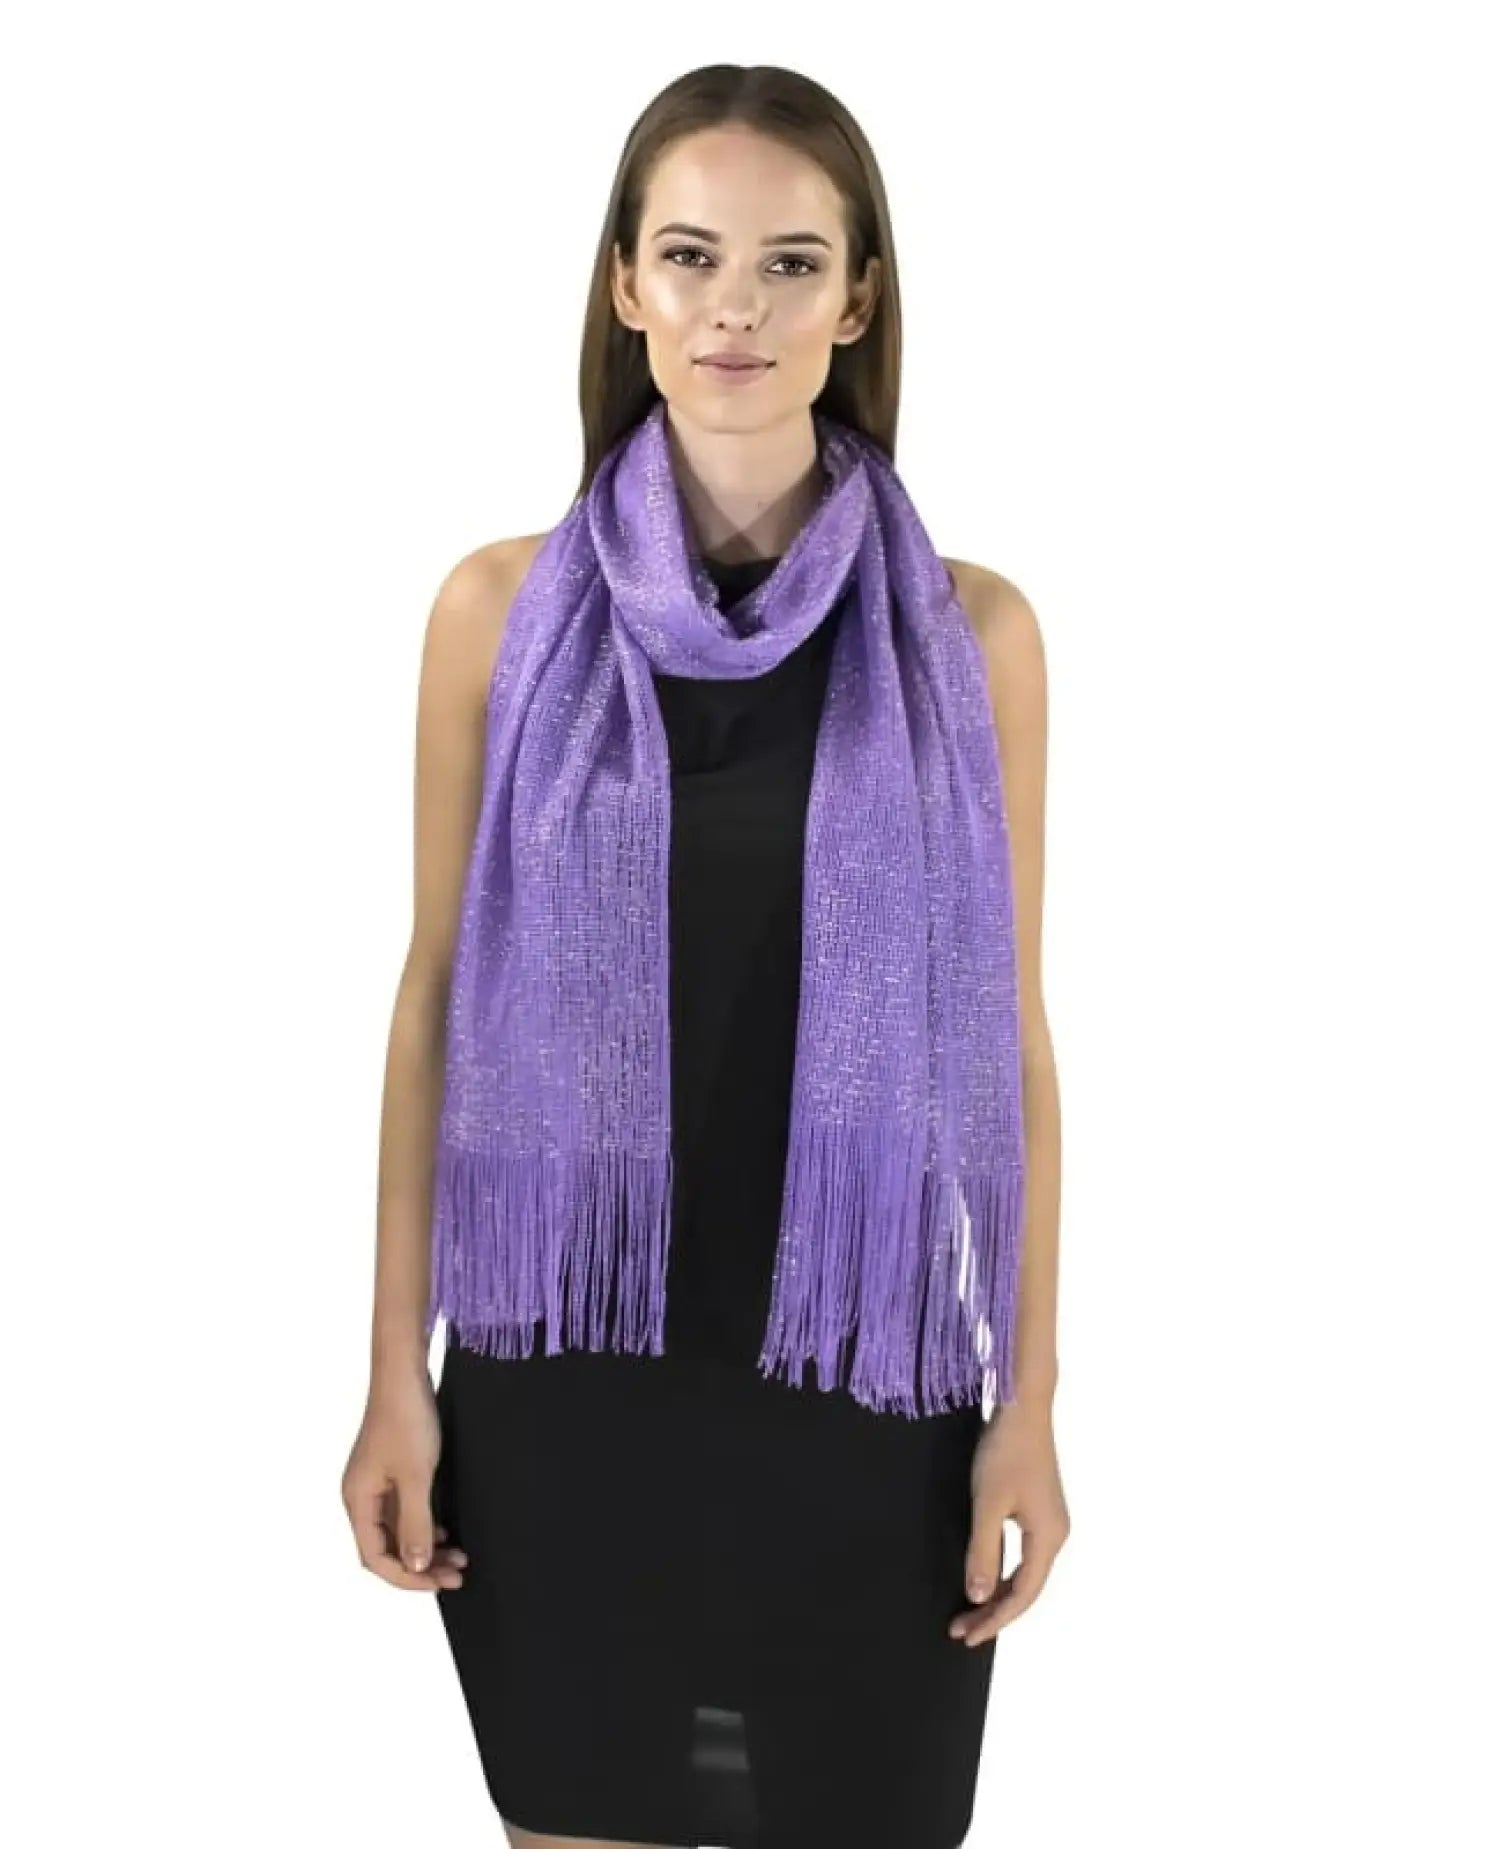 Woman wearing a shimmering lurex scarf from Shimmering Lurex Scarf Fishnet Evening Shawl Scarves.